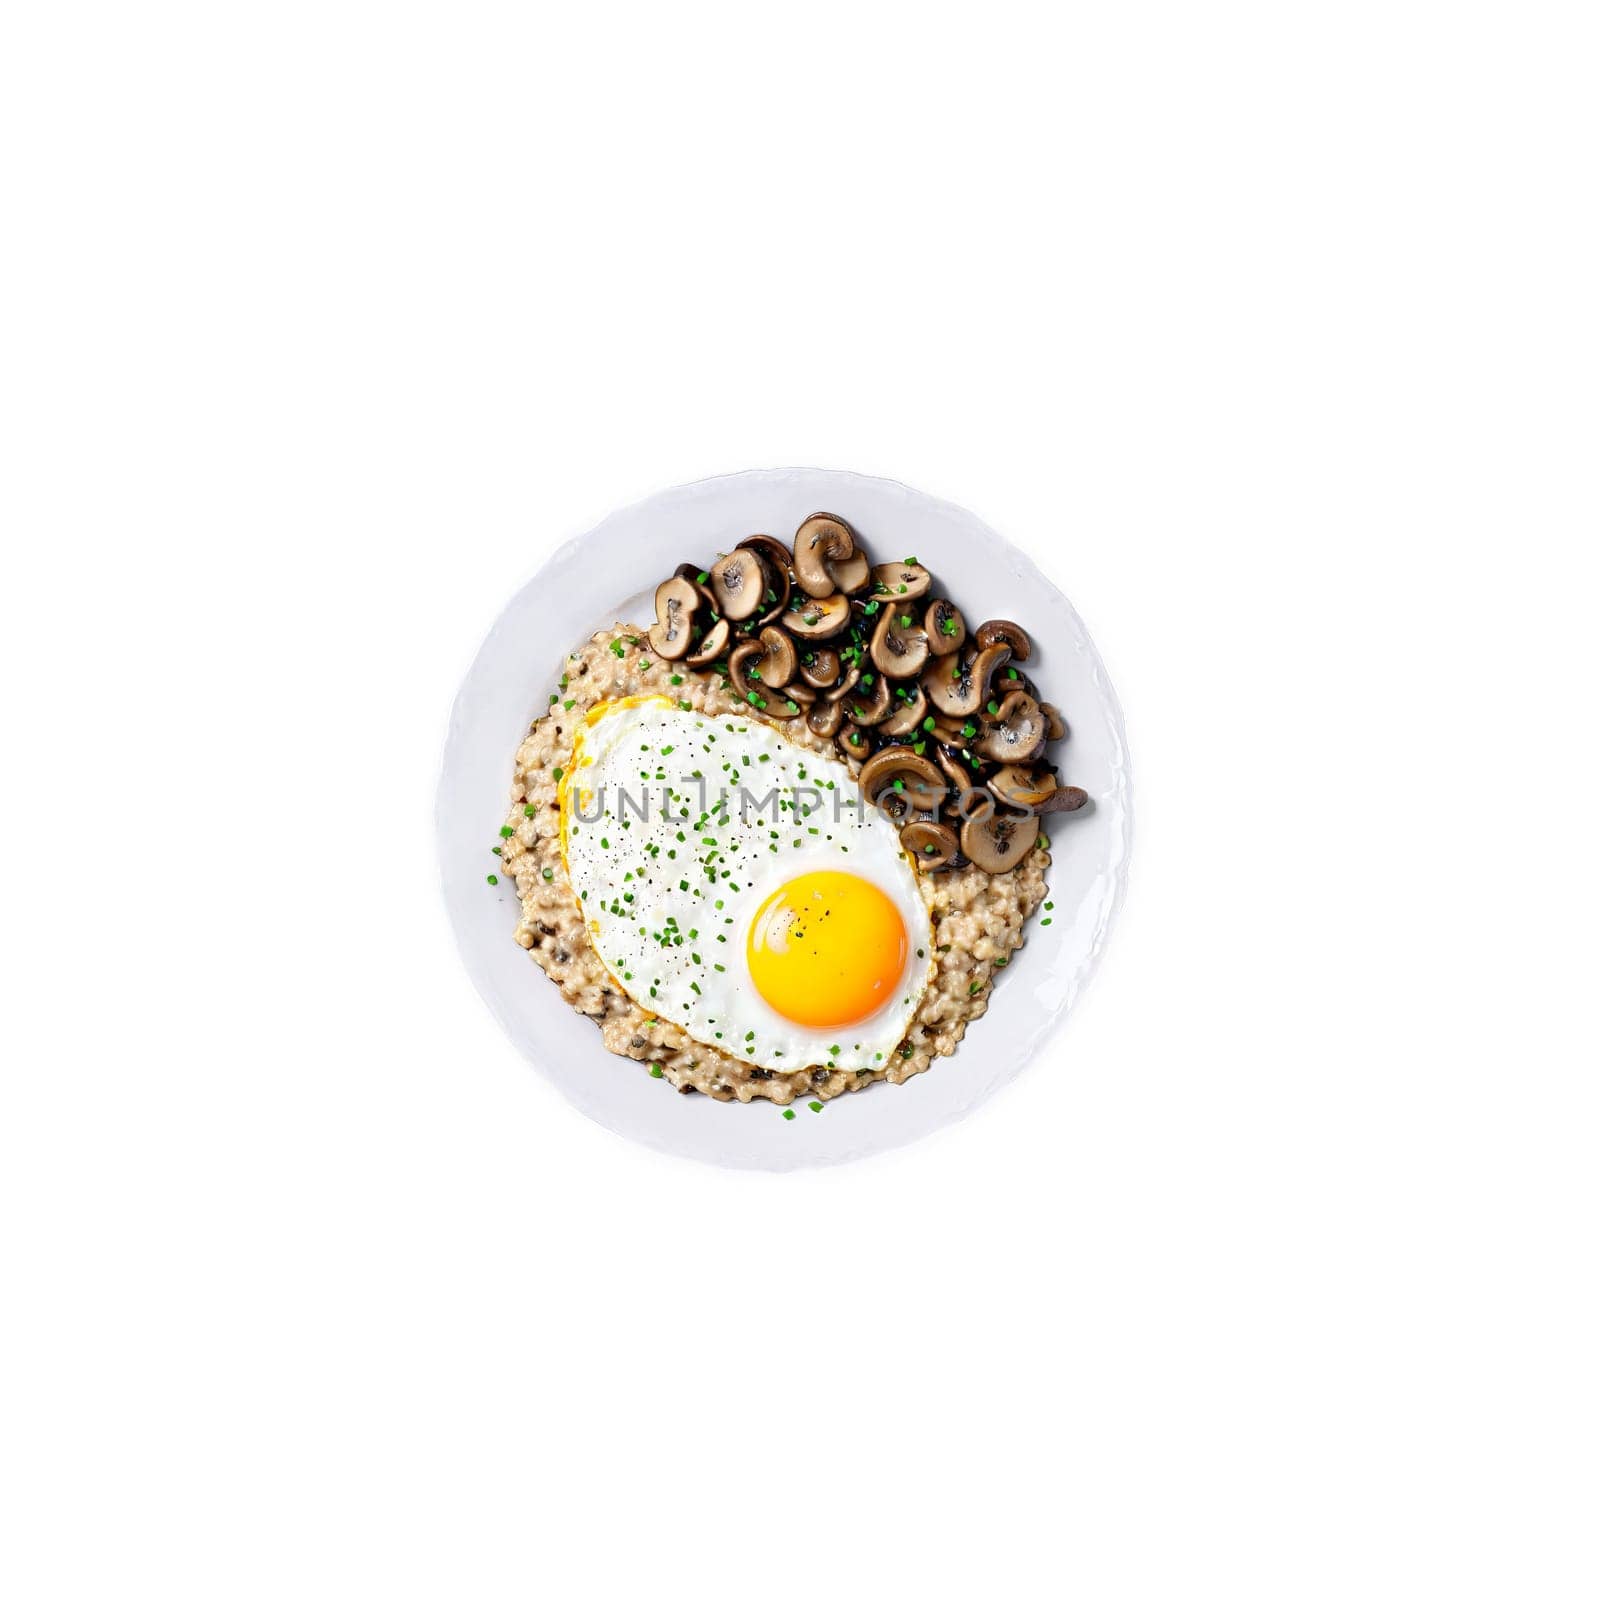 Savory oatmeal creamy oats topped with a fried egg sauteed mushrooms by panophotograph